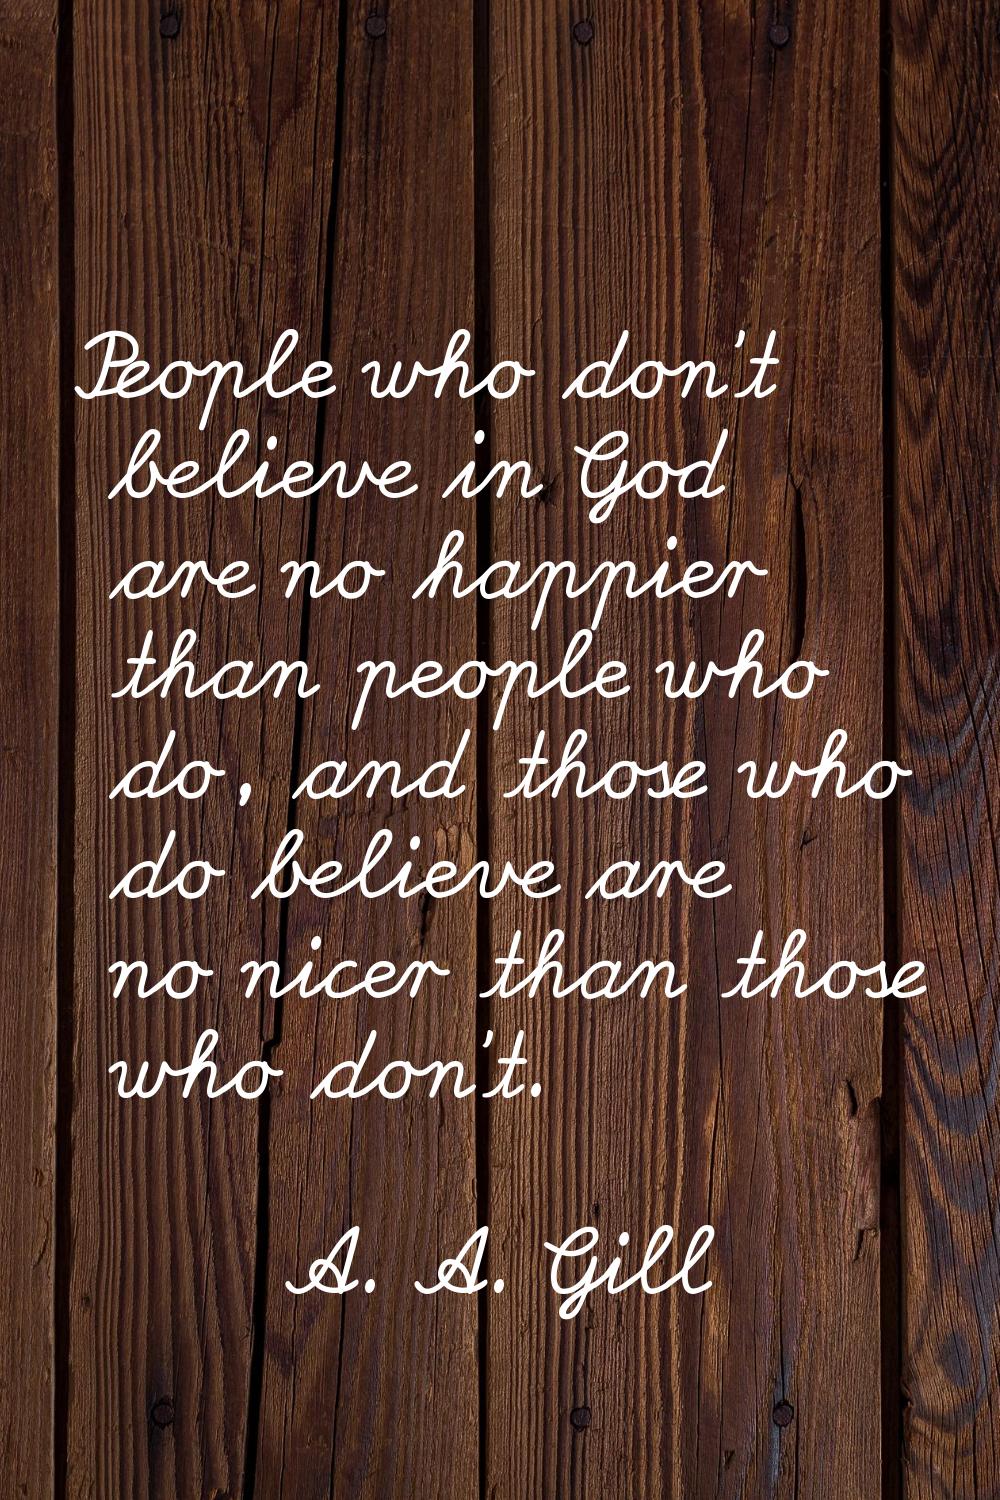 People who don't believe in God are no happier than people who do, and those who do believe are no 